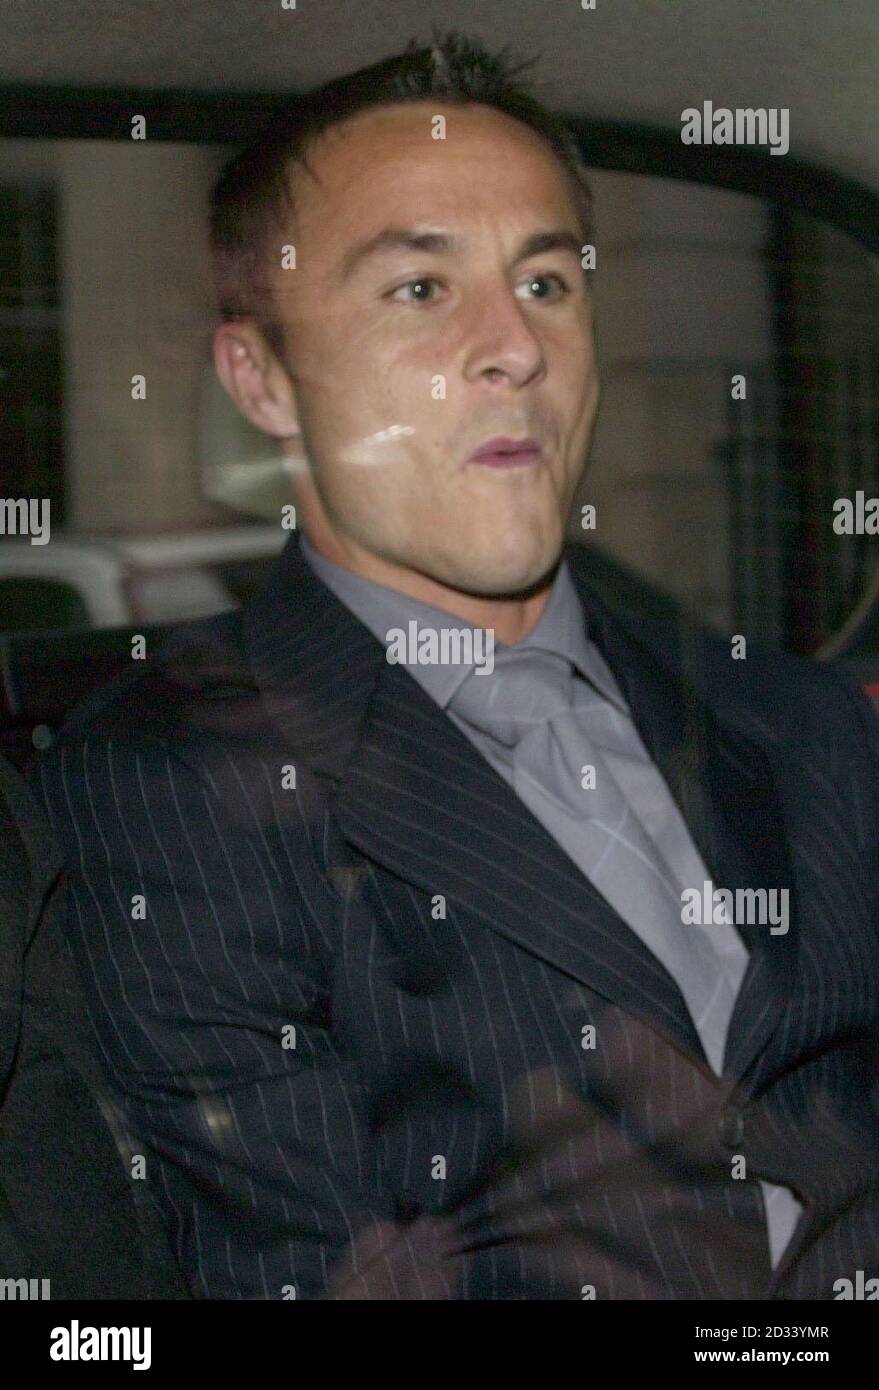 Dennis Wise leaves a press conference in central London announcing Leicester City's decision to sack him after a dispute with his 26-year-old team-mate  Callum Davidson during the club's pre-season tour to Finland over a late night game of cards.   * The 35-year-old former Chelsea captain hit the Scottish international while he was in bed and still drowsy from being asleep, leaving him with a fractured cheekbone.  Stock Photo